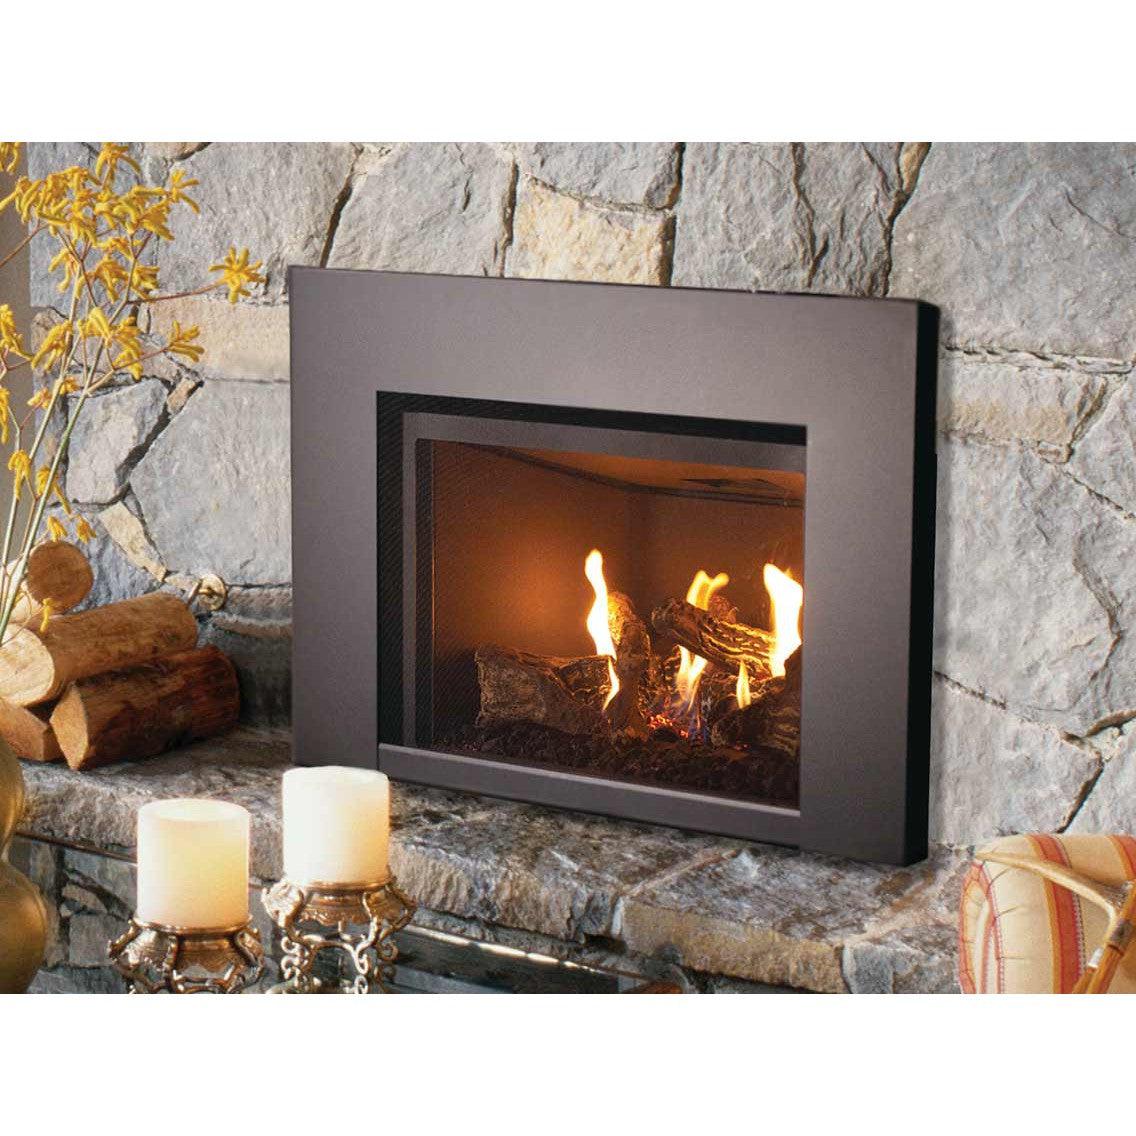 Superior DRI2032 32" Traditional Direct Vent Natural Gas Fireplace Insert